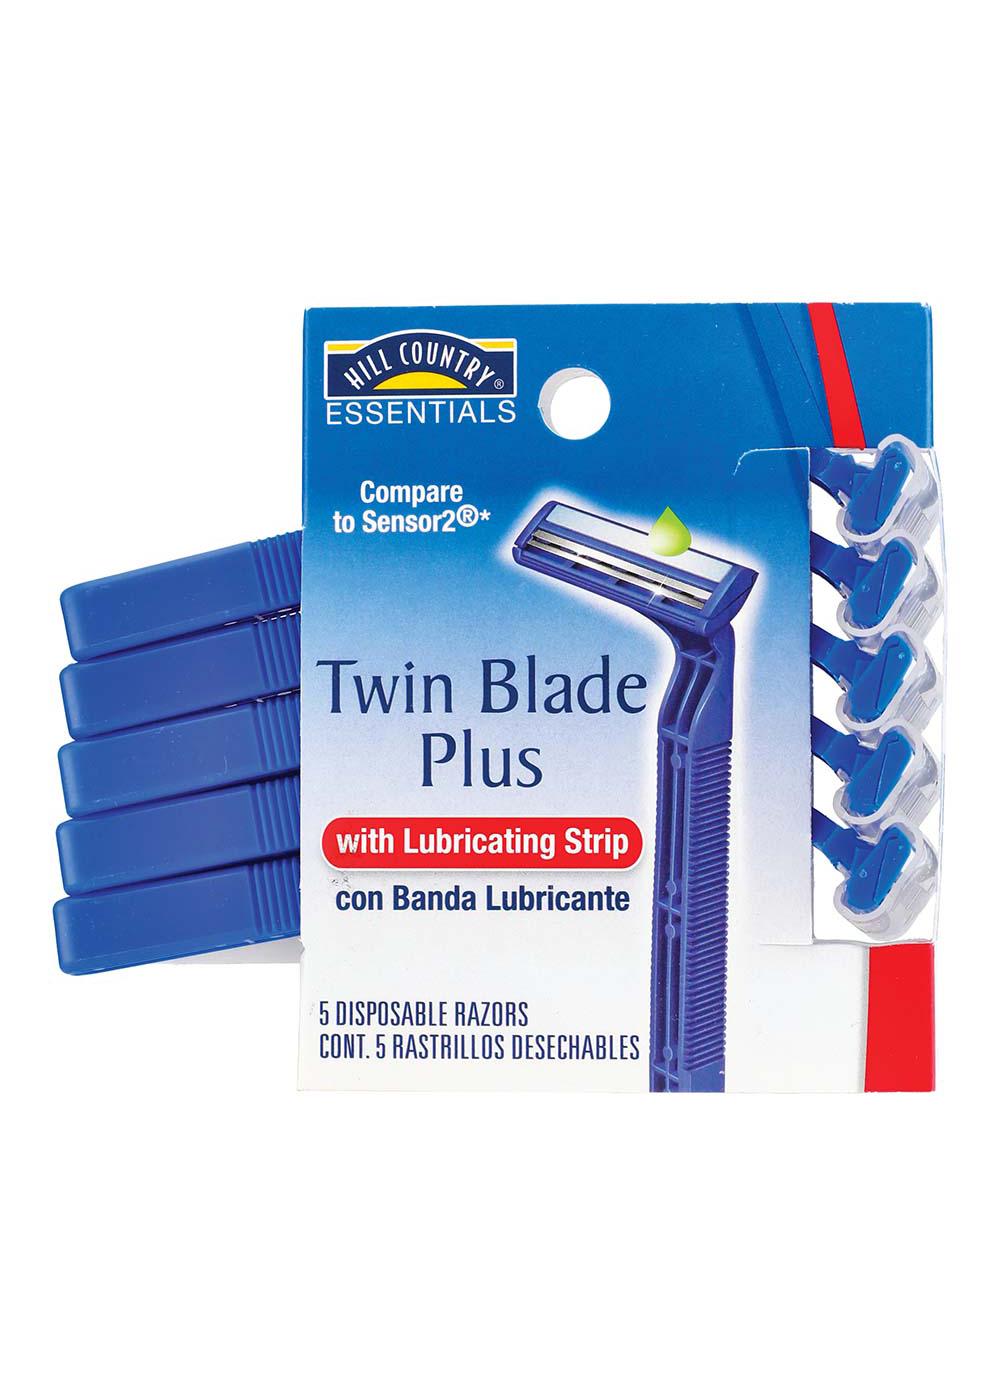 Hill Country Essentials Men's Twin Blade Plus with Lubricating Strip Disposable Razors; image 1 of 5